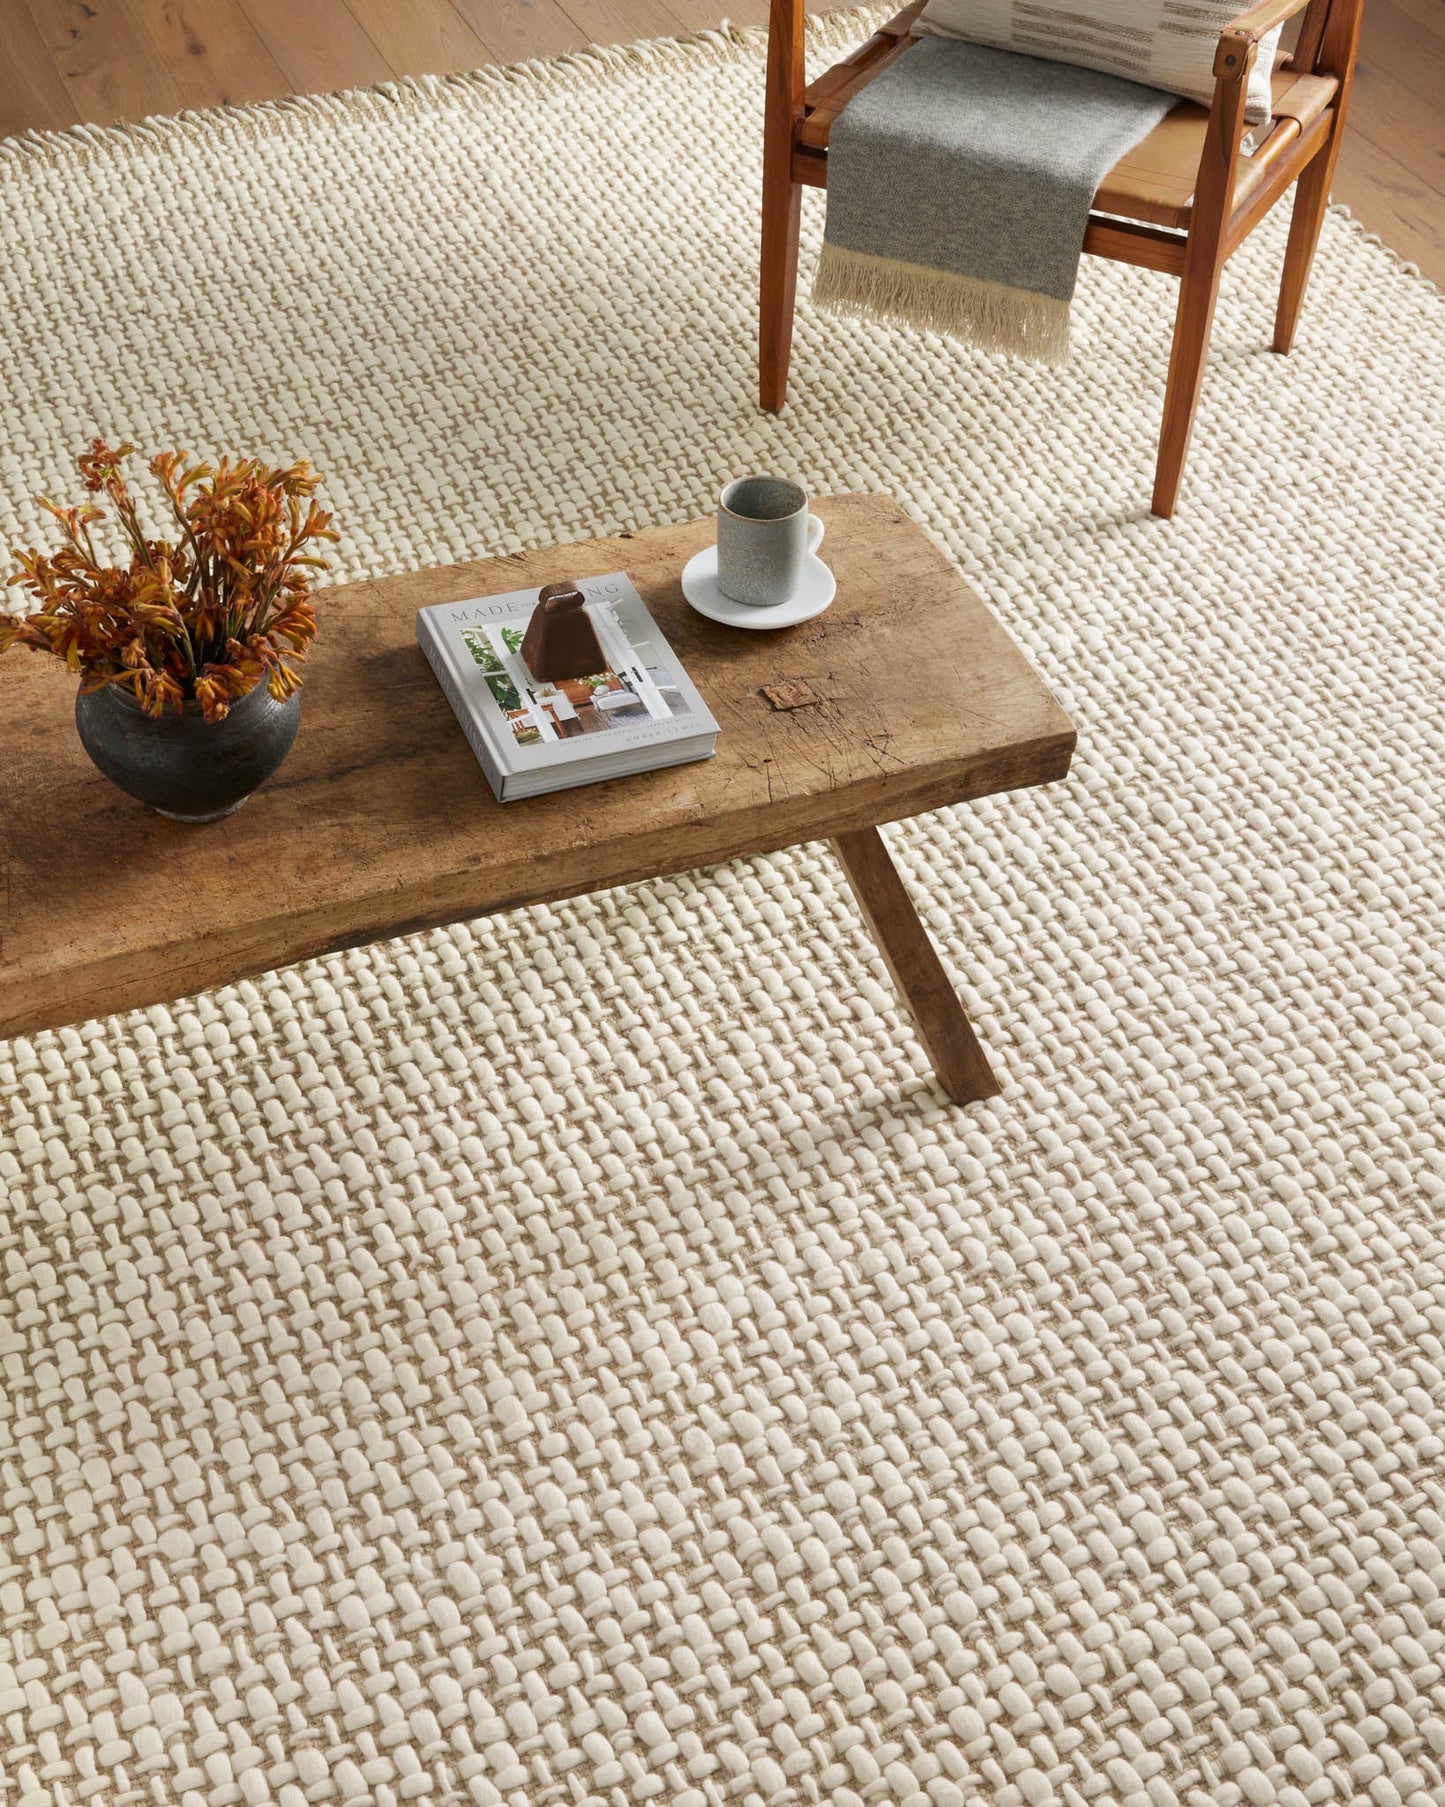 Amber Lewis x Loloi Yellowstone Rug - Natural Ivory